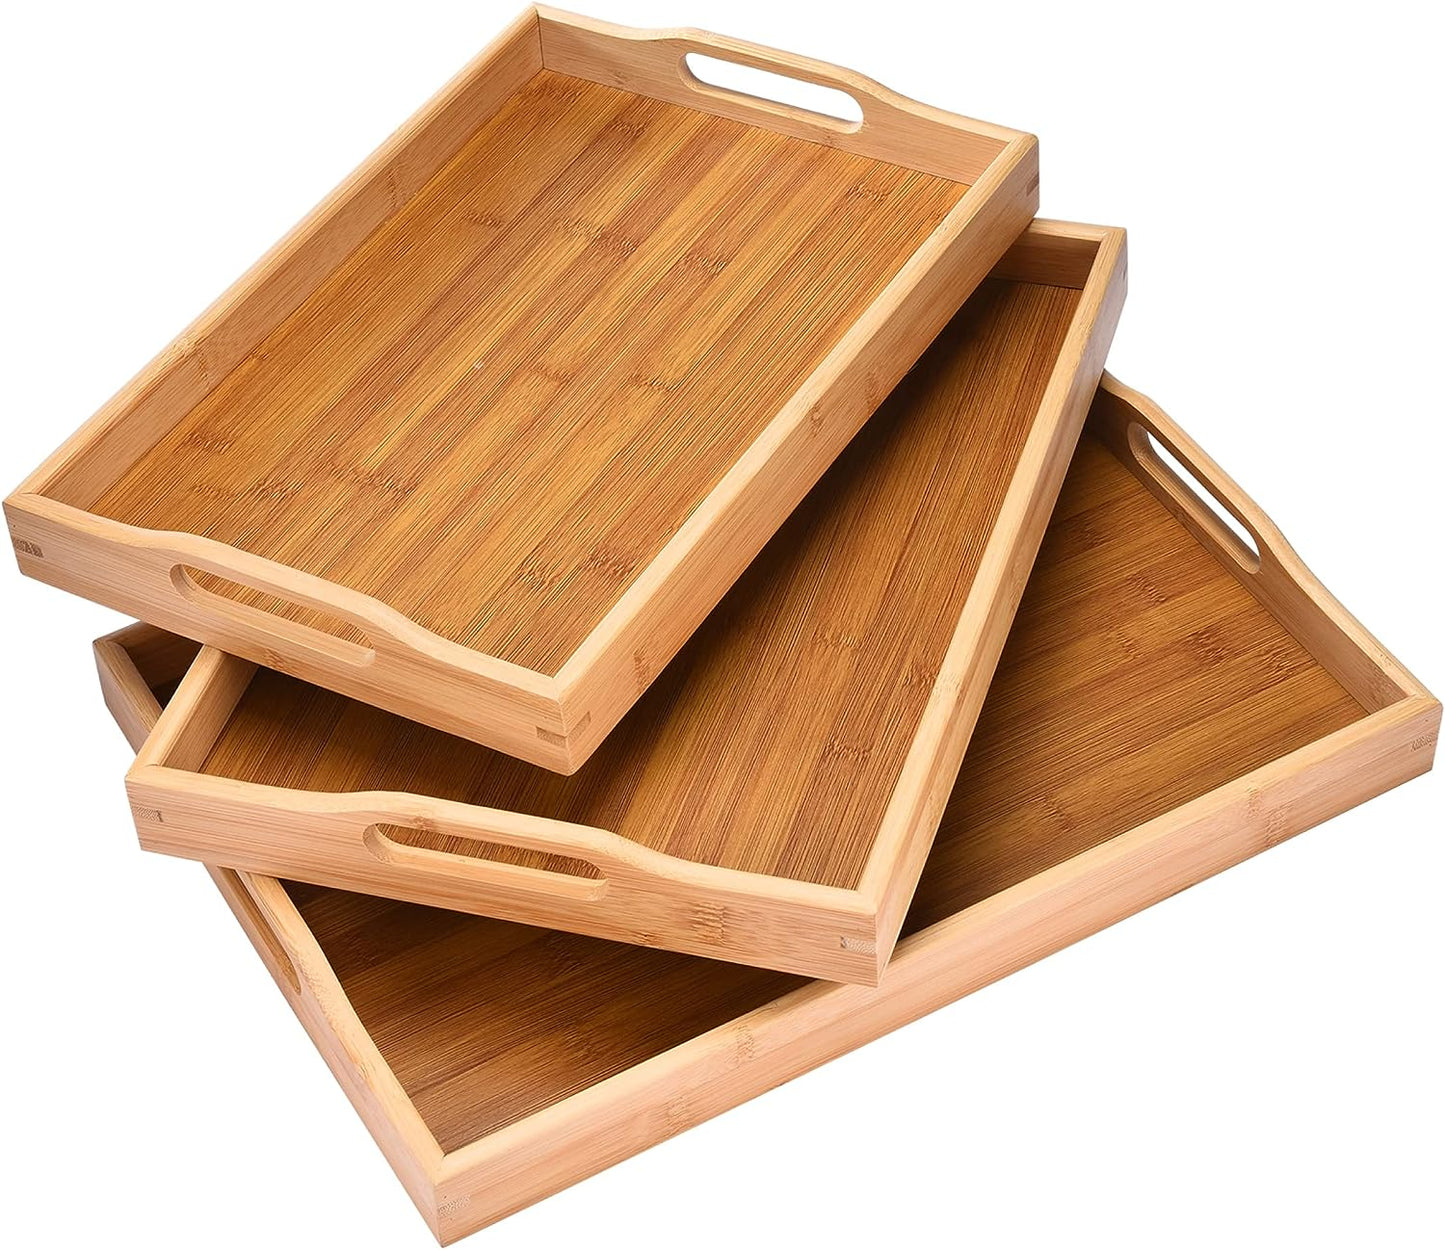 Prosumers Choice 3 Pack Bamboo Serving Trays with Handles - Bamboo Trays for Food-Serving Tray - Wooden Trays for Food - Set with Different Sizes